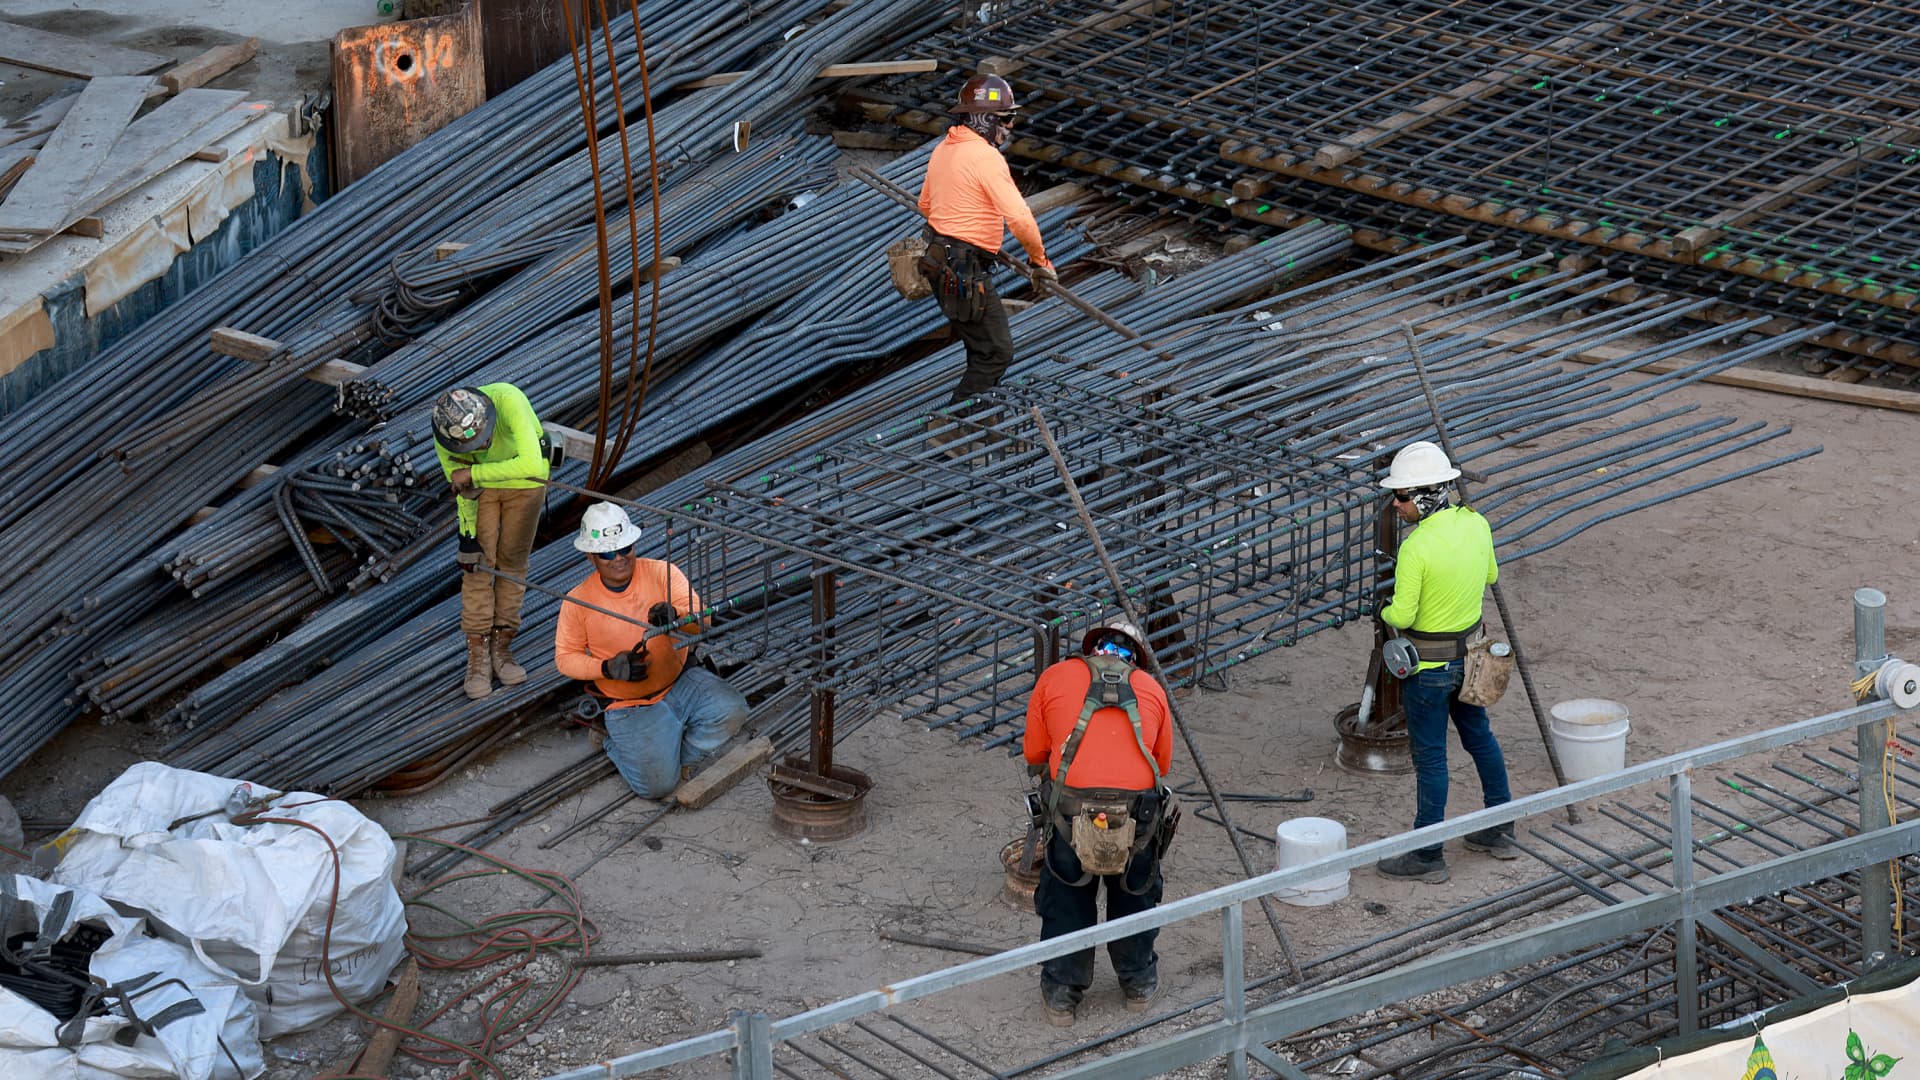 Construction workers on a job site on March 10, 2023 in Miami, Florida. A report released by the Bureau of Labor Statistics showed the US economy added 311,000 jobs in February. The unemployment rate ticked up to 3.6% from 3.4%. 